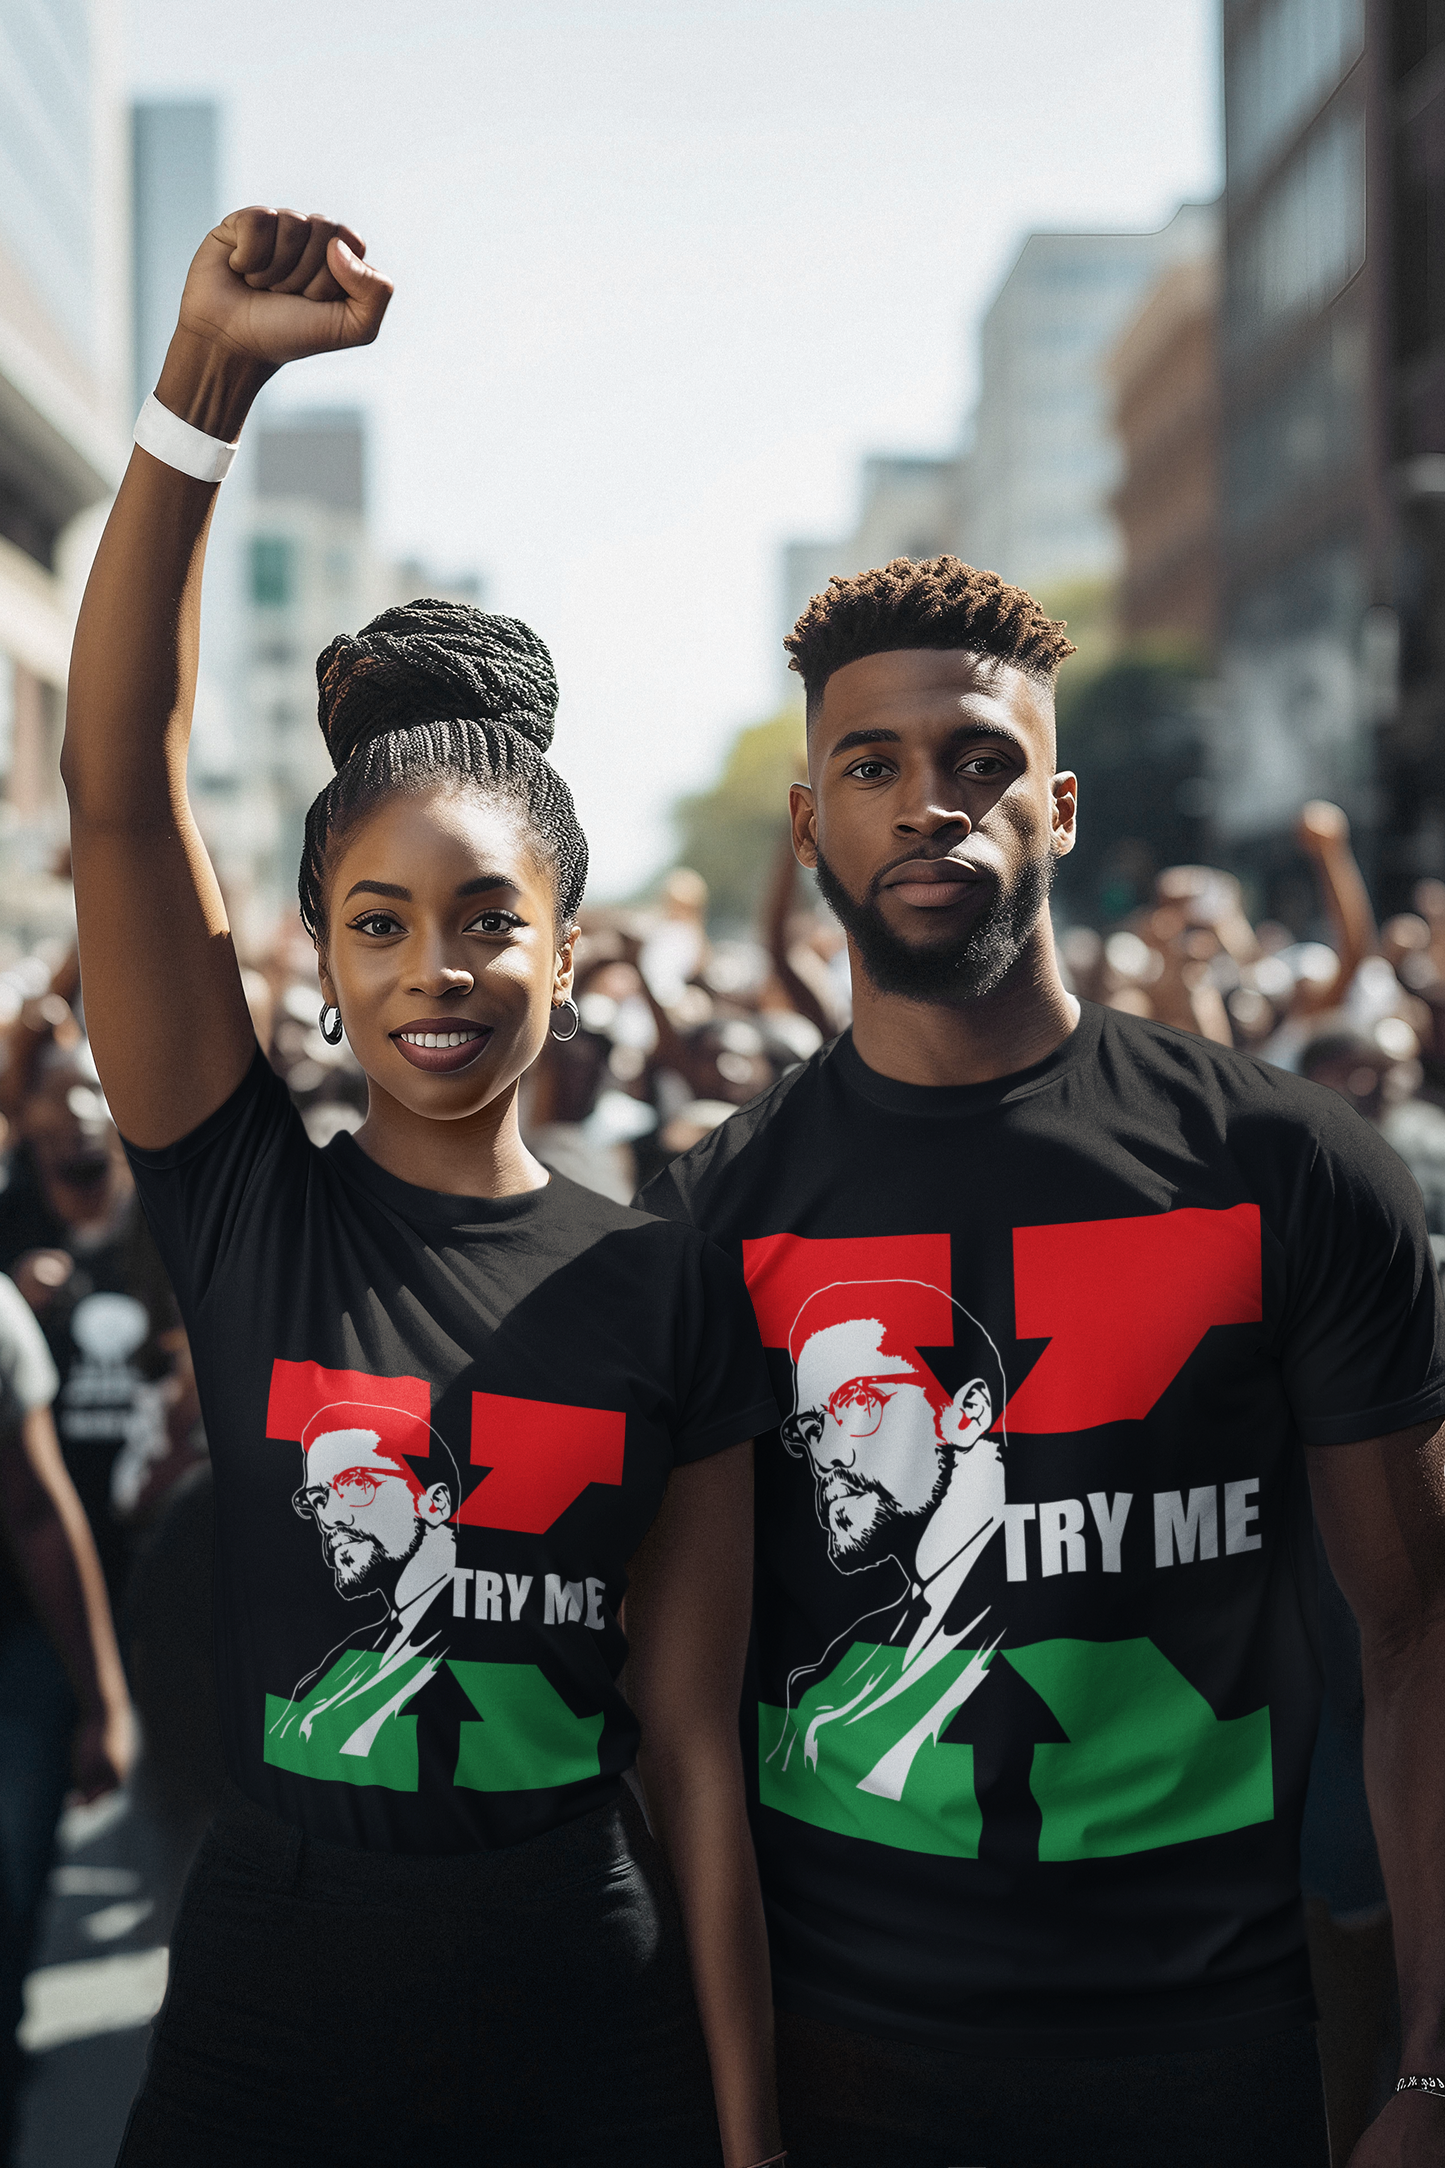 African American woman and man with a Black t shirts. On the t shirts are sketches of Malcolm X with a Red and Green X behind him and the words "Try Me' next to him in white letters.